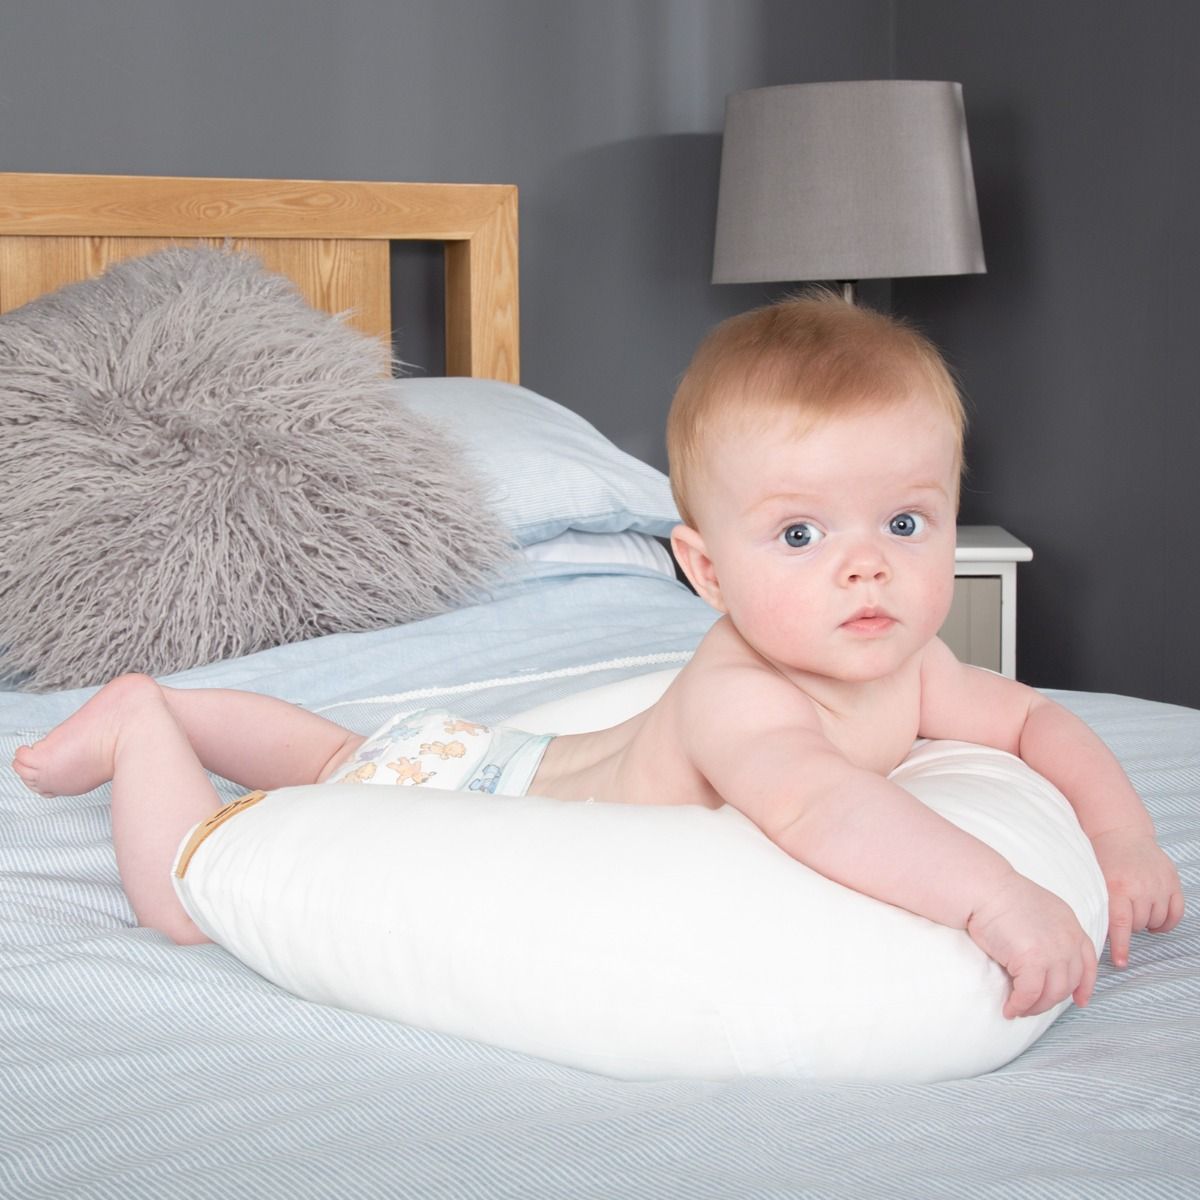 Cuddle Co Organic Cotton Feeding & Infant Support Pillow - White